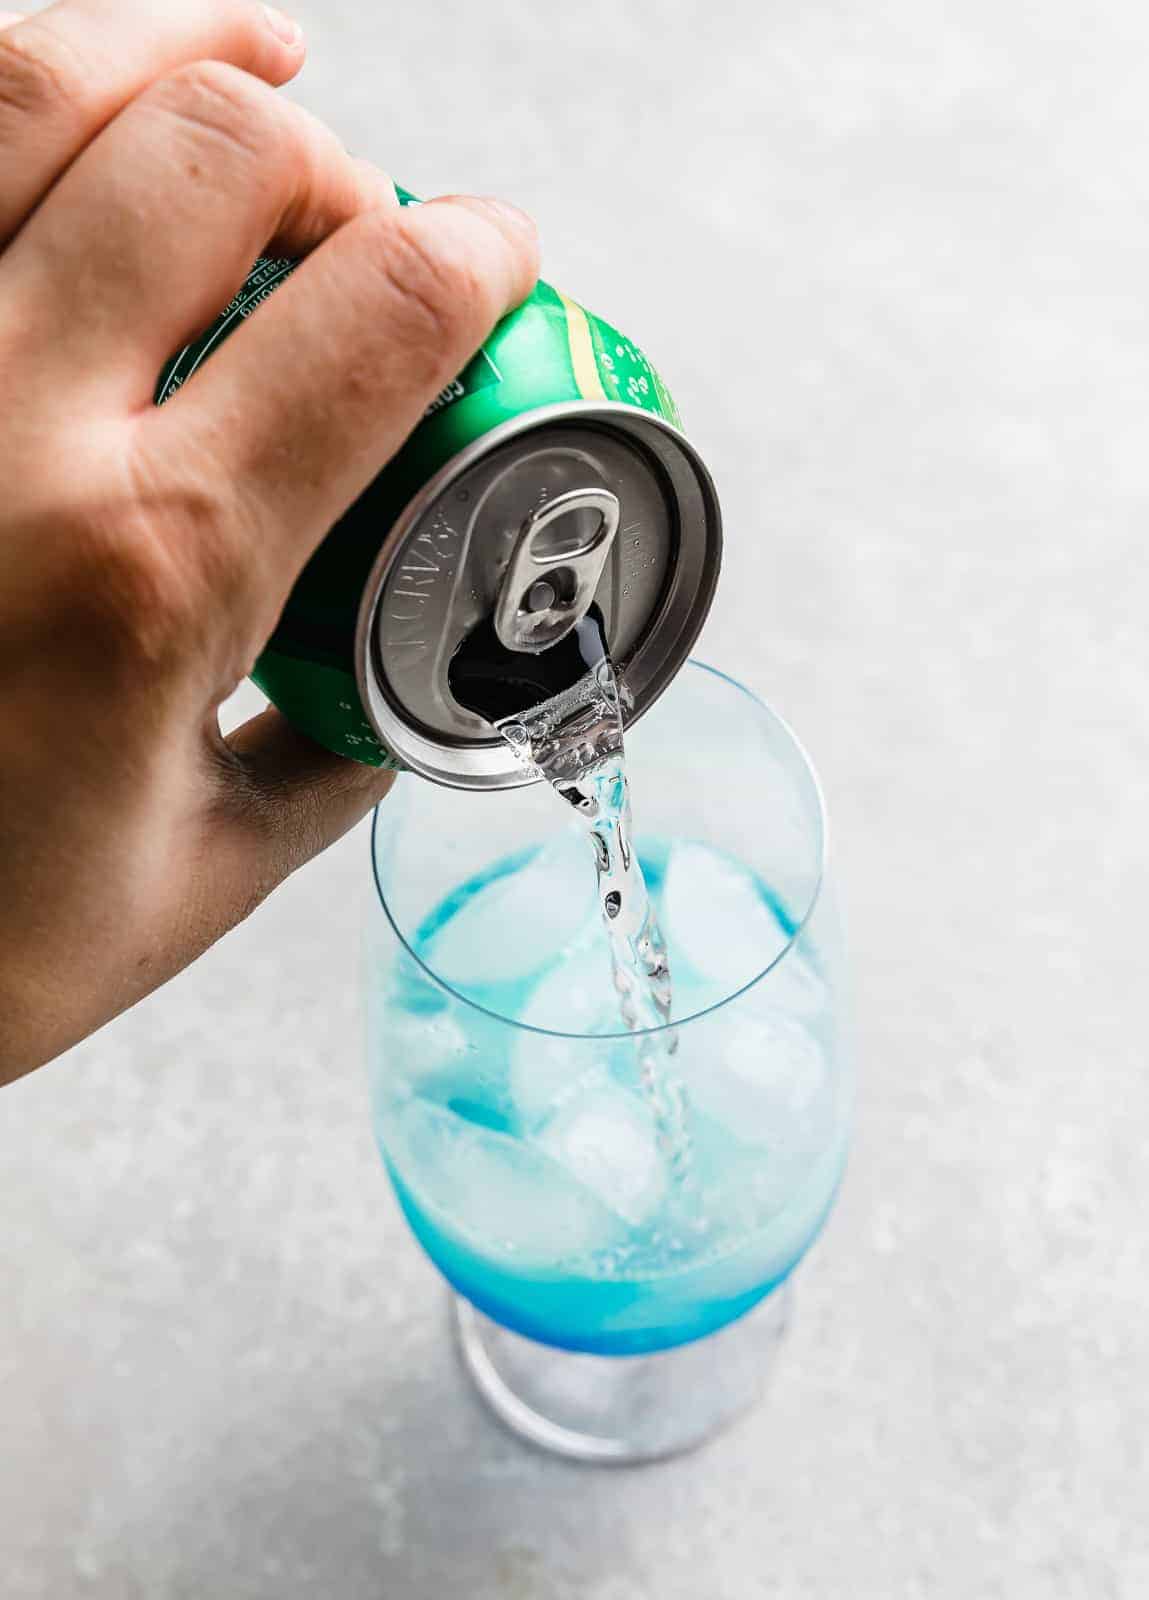 A can of 7 UP being poured into a glass cup that has blue curaçao syrup in it. 